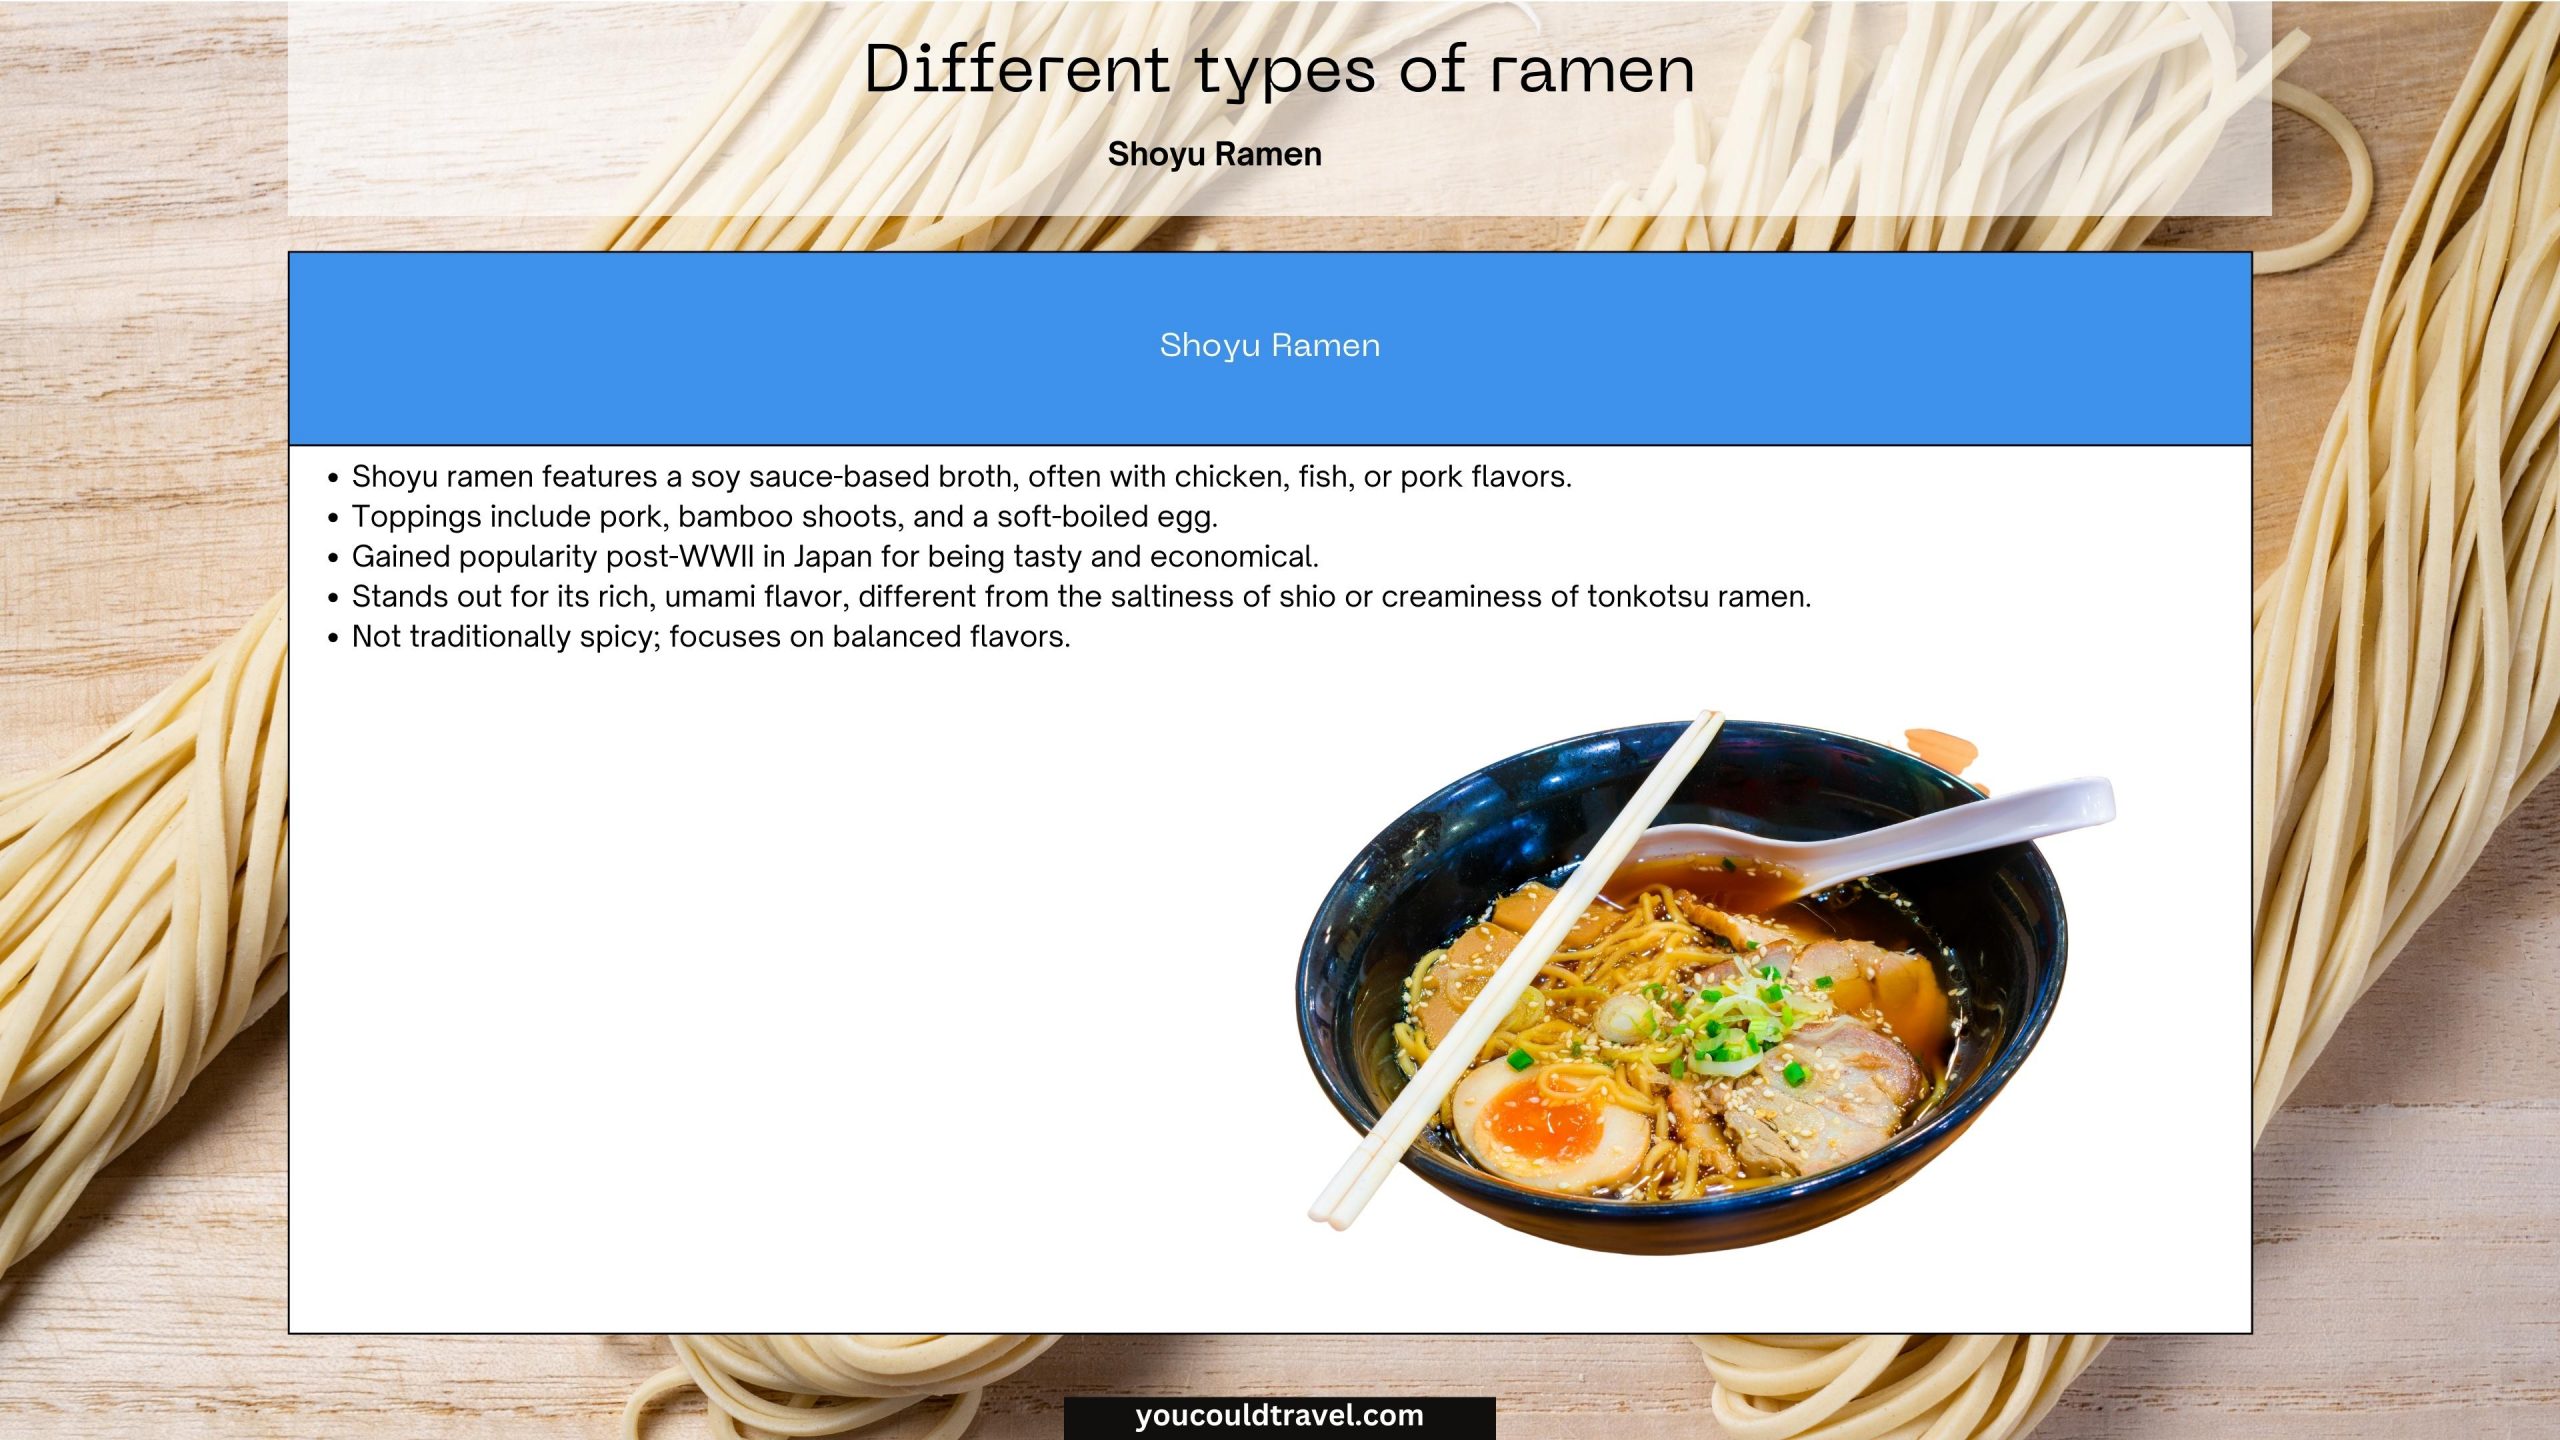 Shoyu ramen - explanation and picture to recognise it with ease